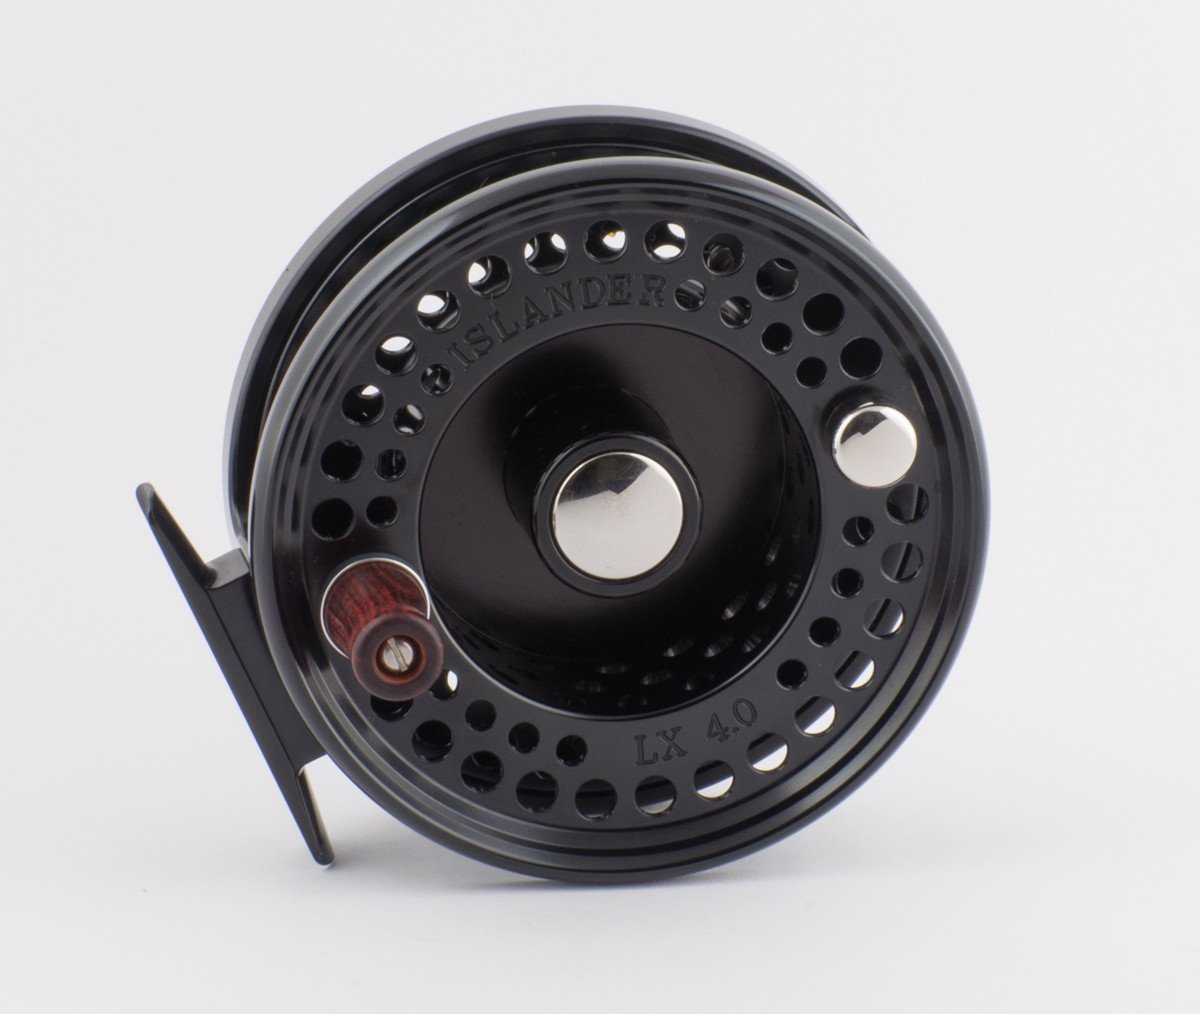 Islander LX Fly Reels - Drift Outfitters & Fly Shop Online Store